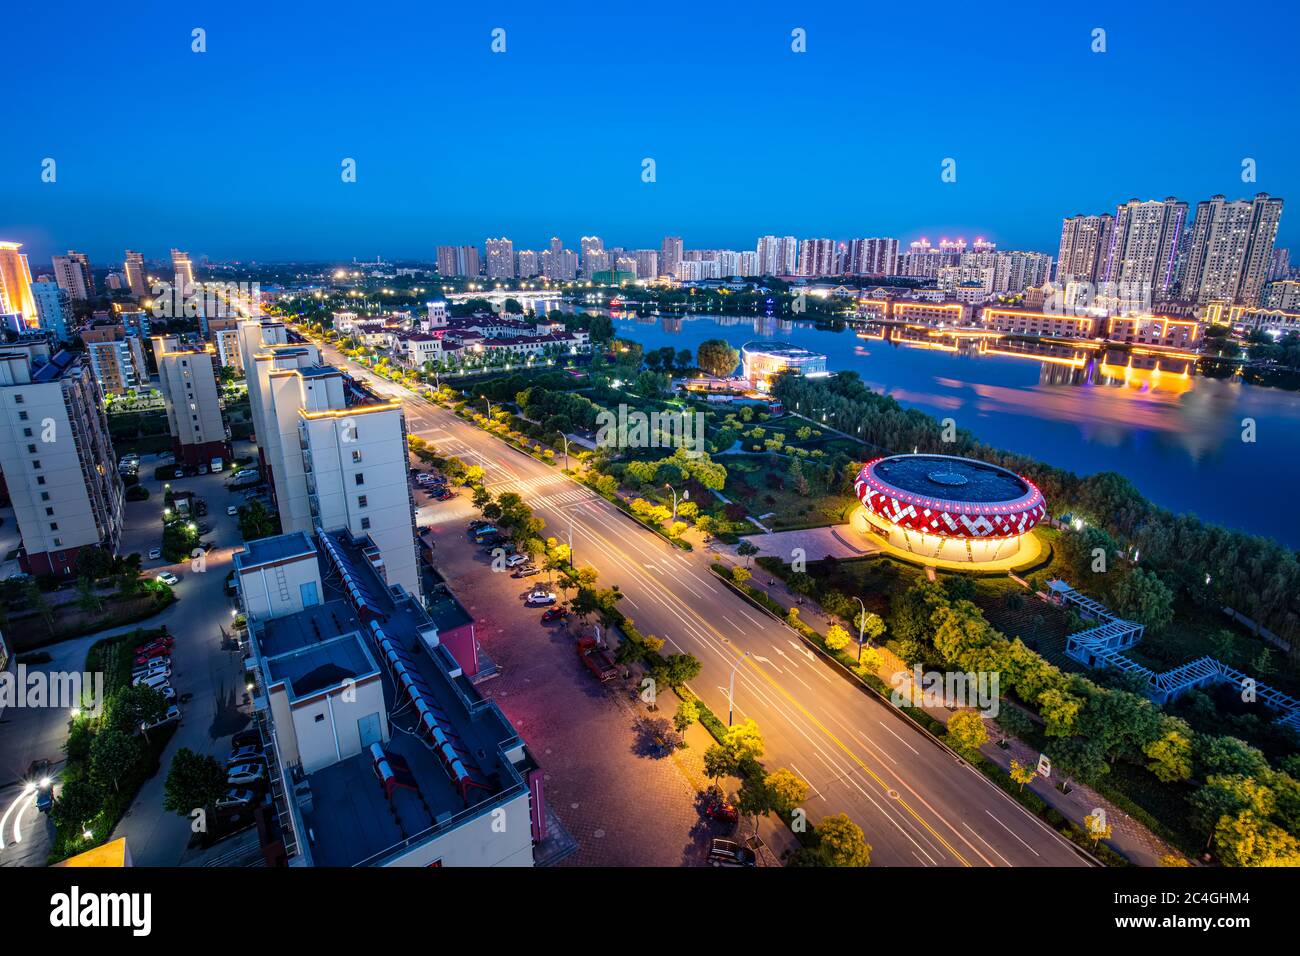 The city by the river is at night, Roads and traffic flow at night Stock Photo